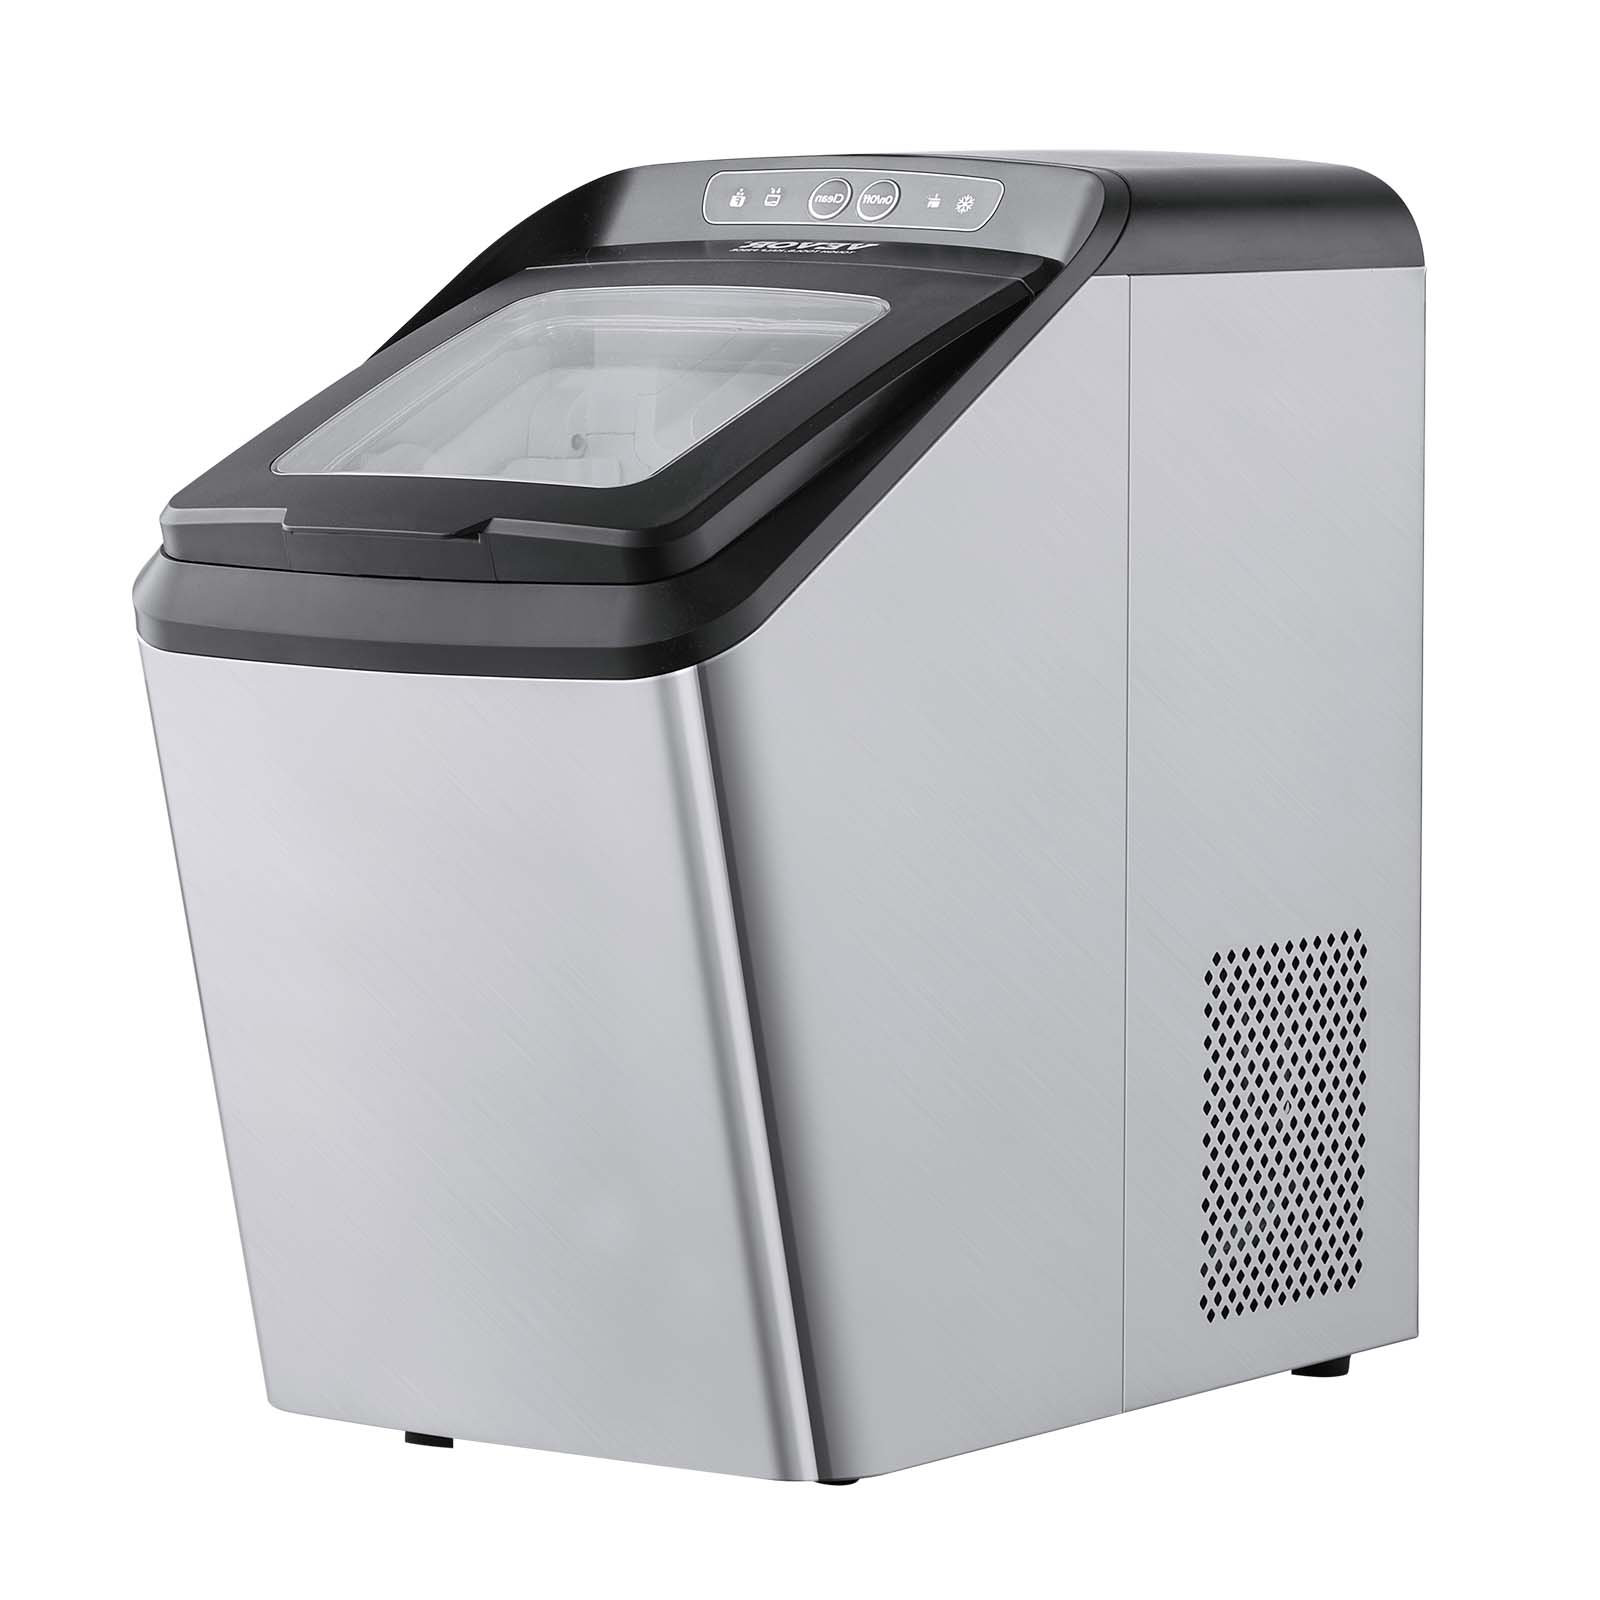 R.W.Flame Counter top Ice Maker Machine,40LBS/24H Compact Ice